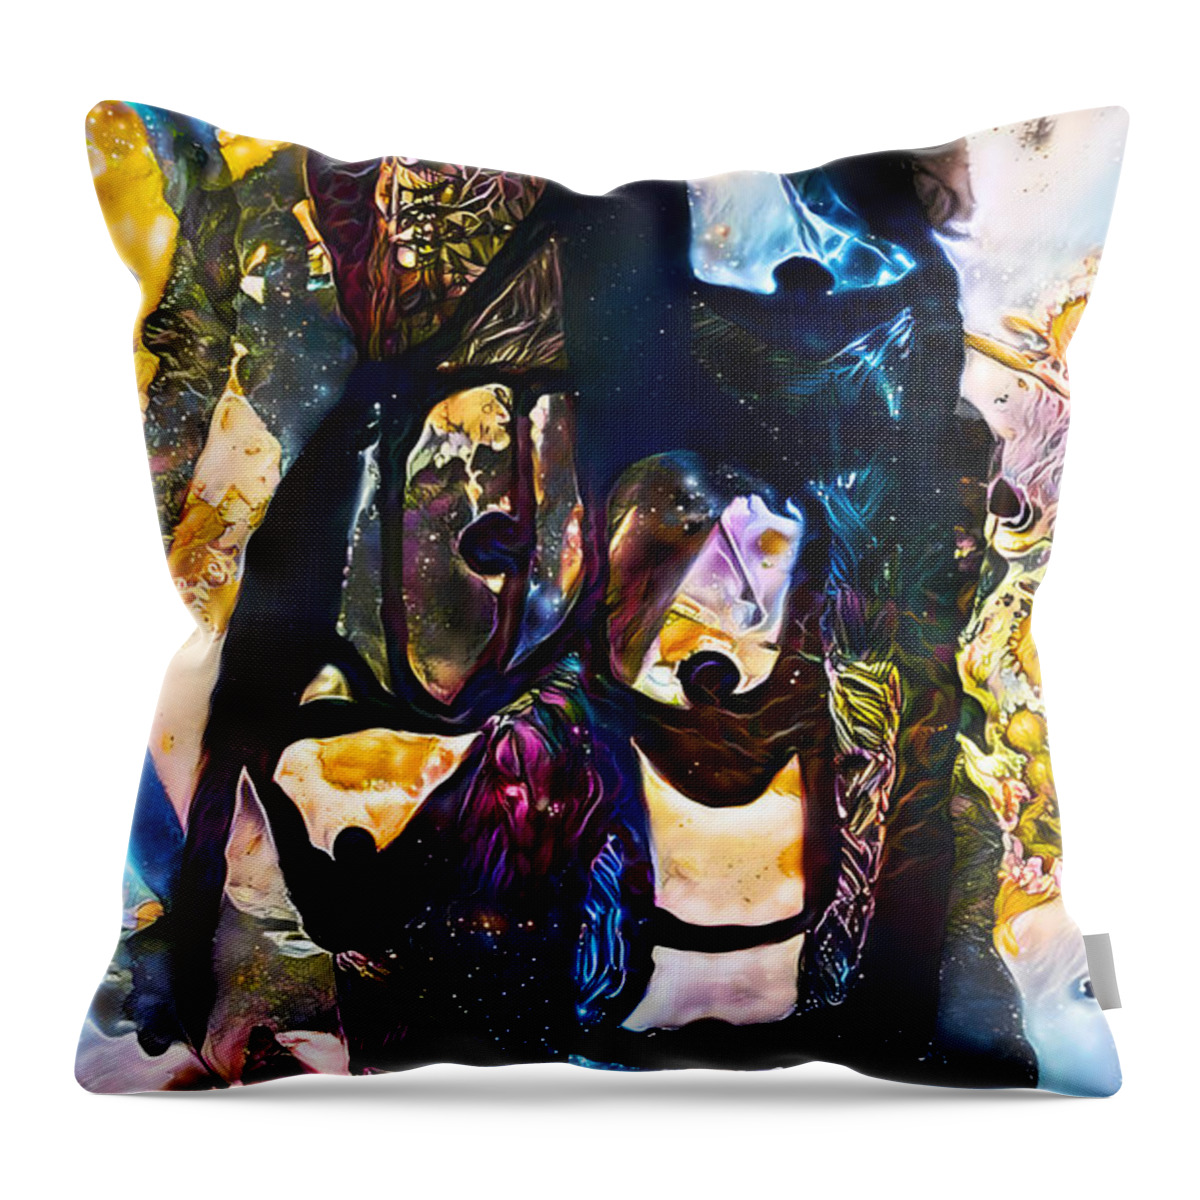 Contemporary Art Throw Pillow featuring the digital art 83 by Jeremiah Ray